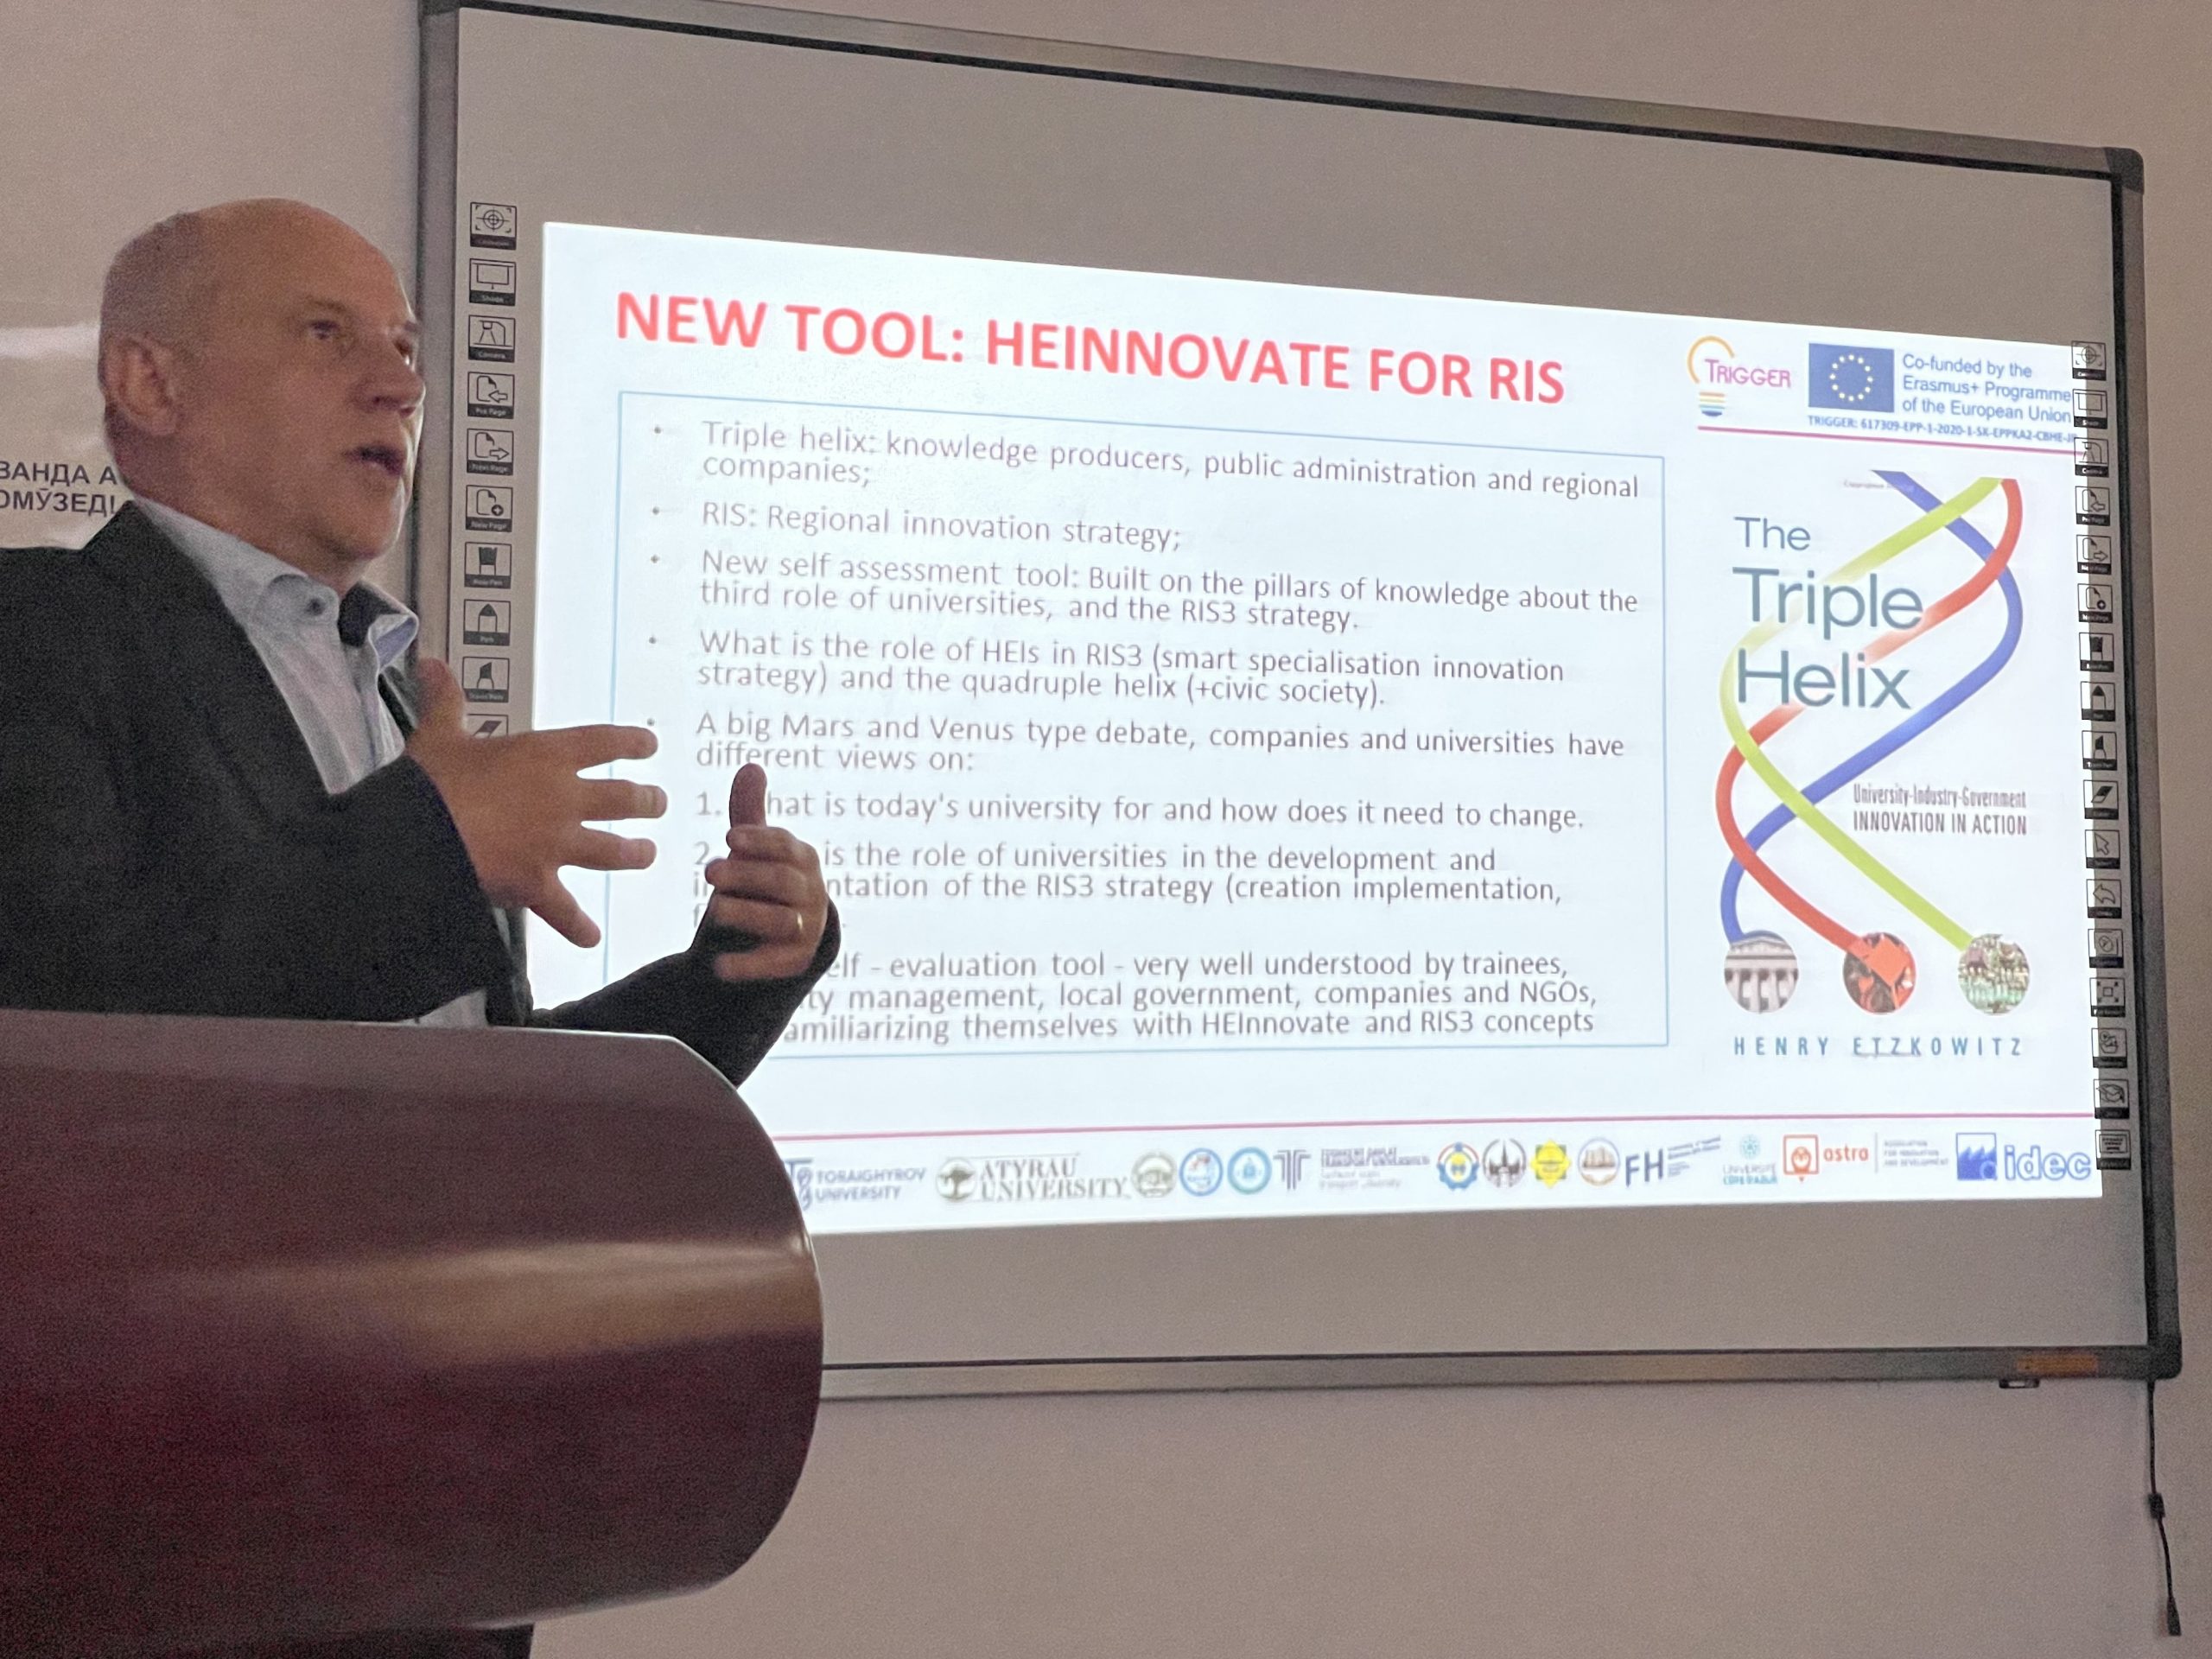 The HEInnovate for RIS is going worldwide